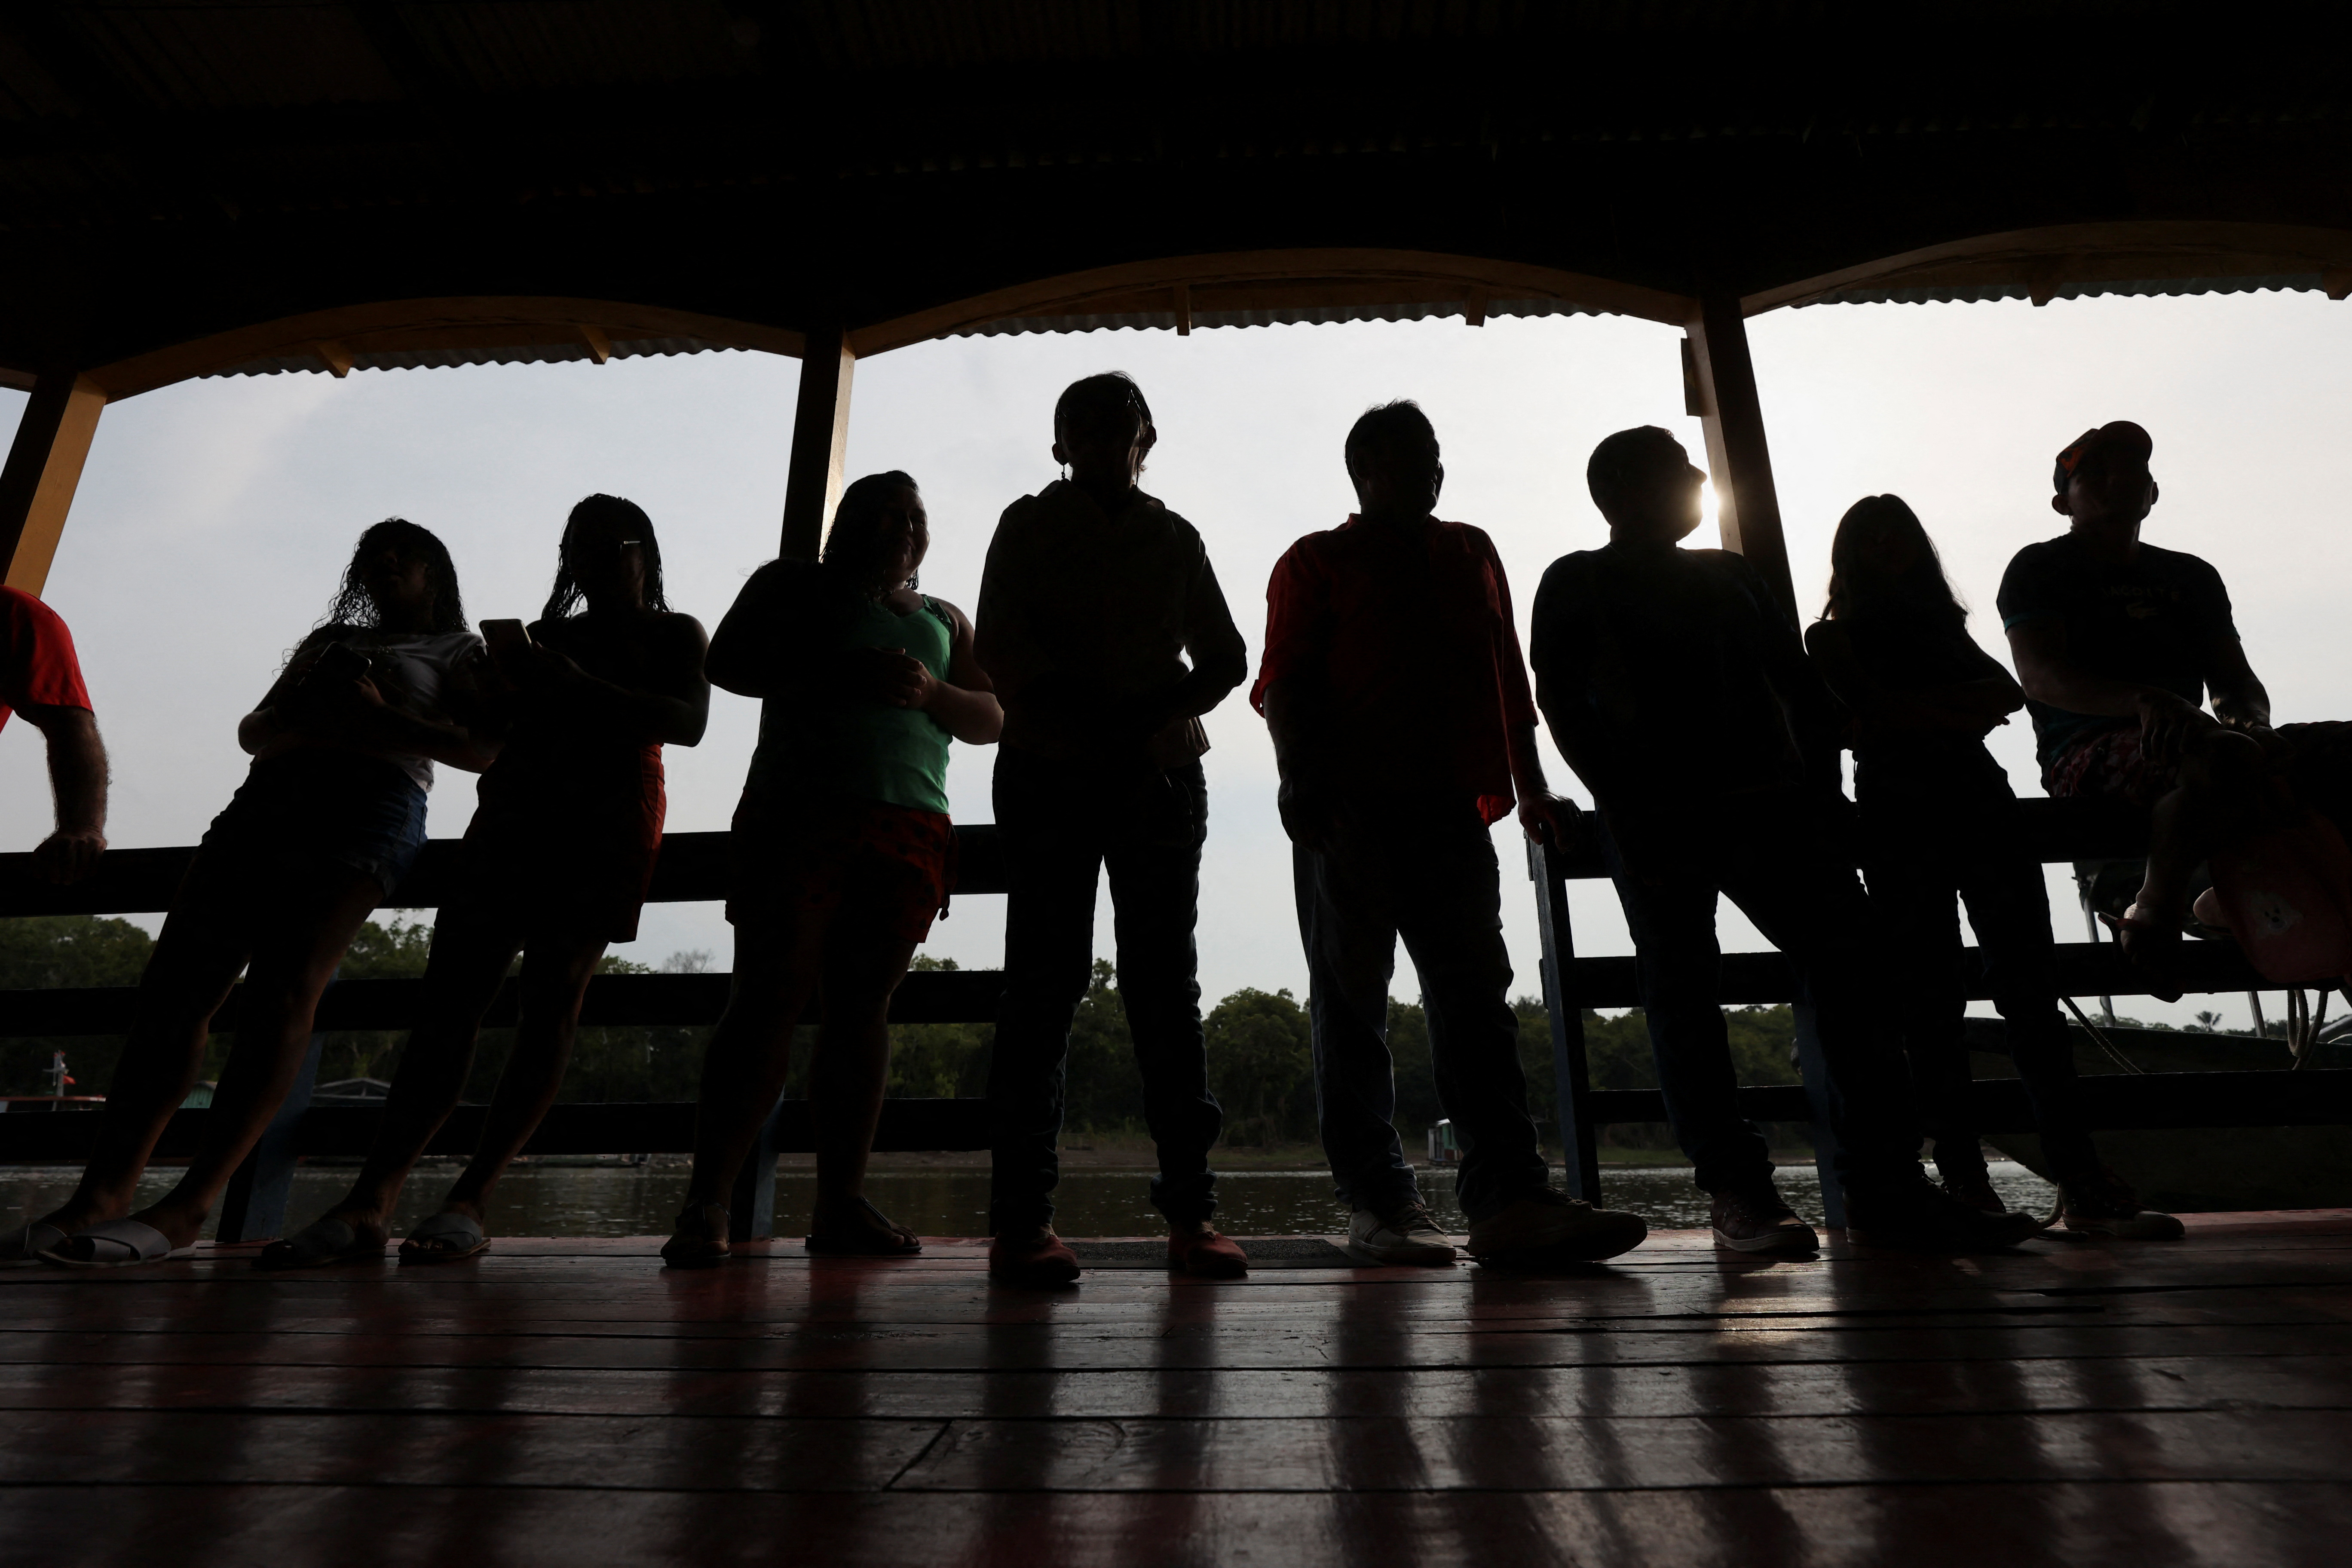 A line at a voting center in Rio Negro, Brazil (REUTERS/Bruno Kelly)